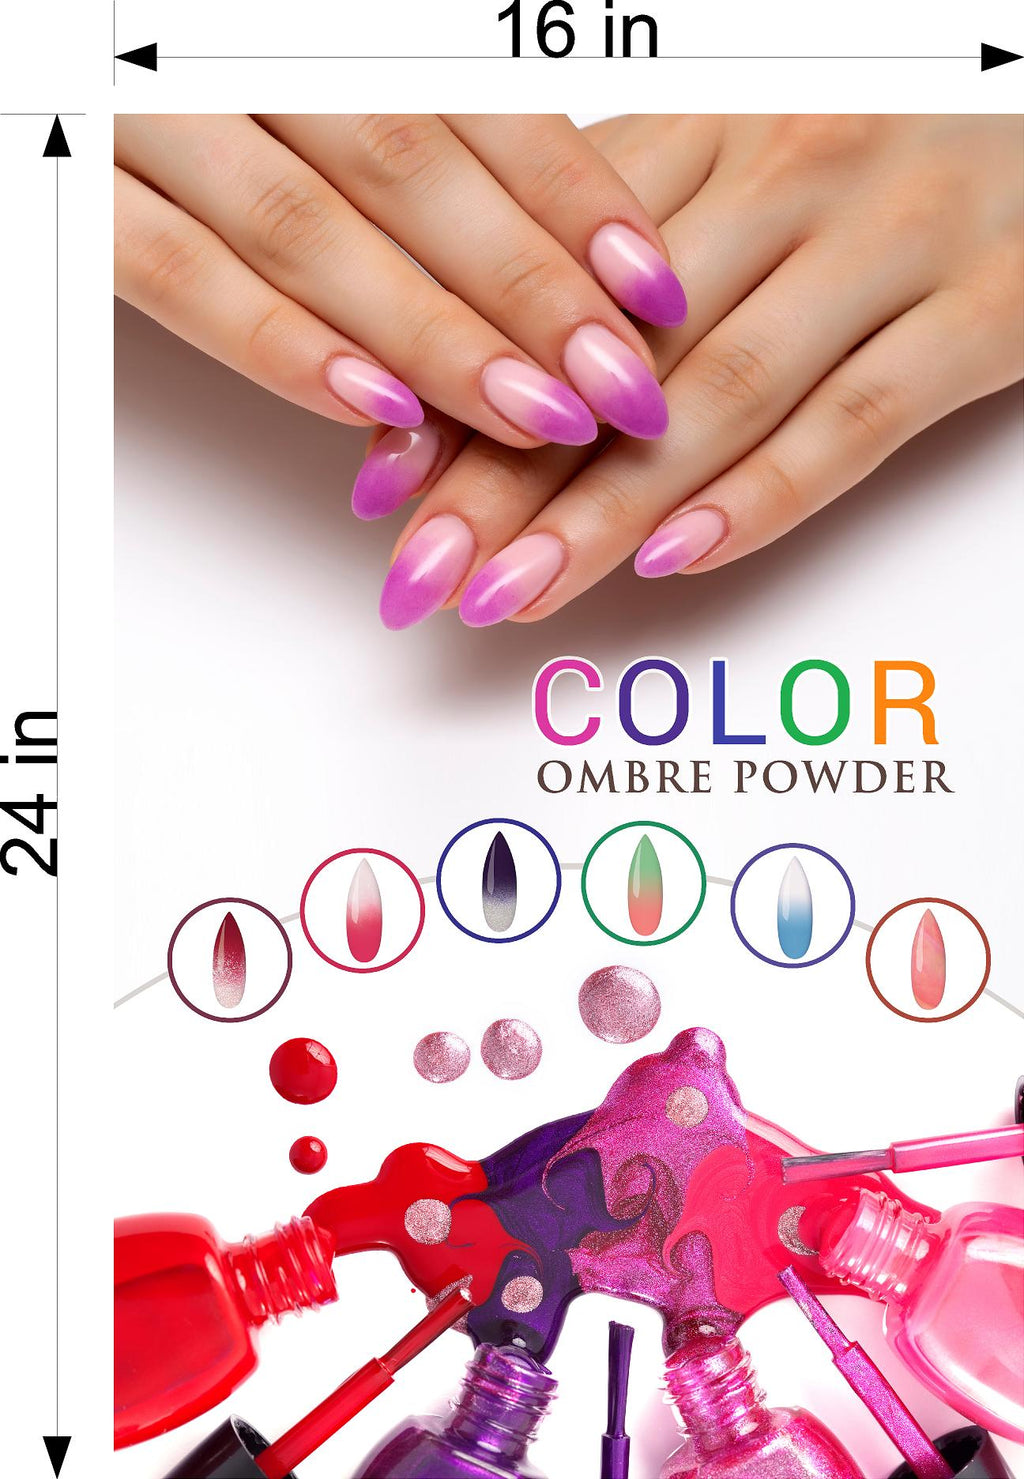 Ombre Nails 03 Window Decal Interior/Exterior Vinyl Adhesive Front BLOCKS Outside Inside View Semitransparent Privacy Vertical